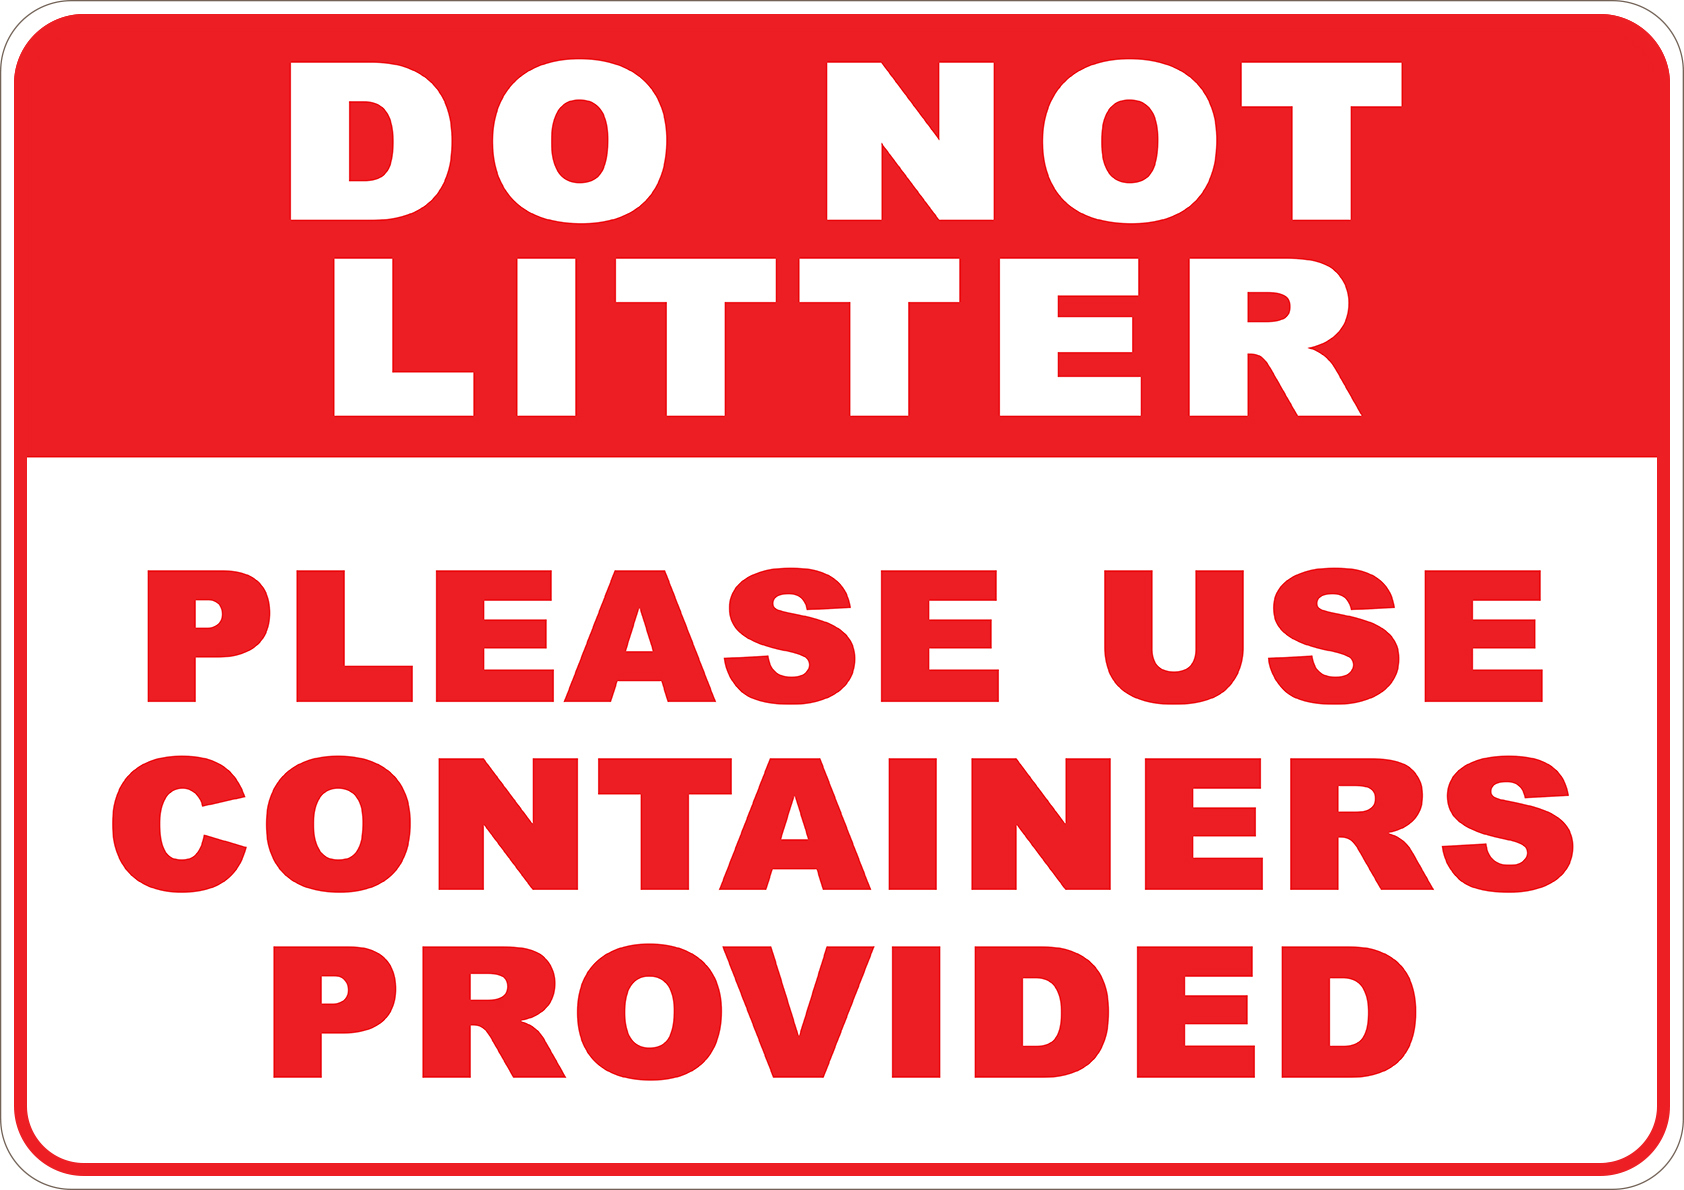 Please Use Containers Provided